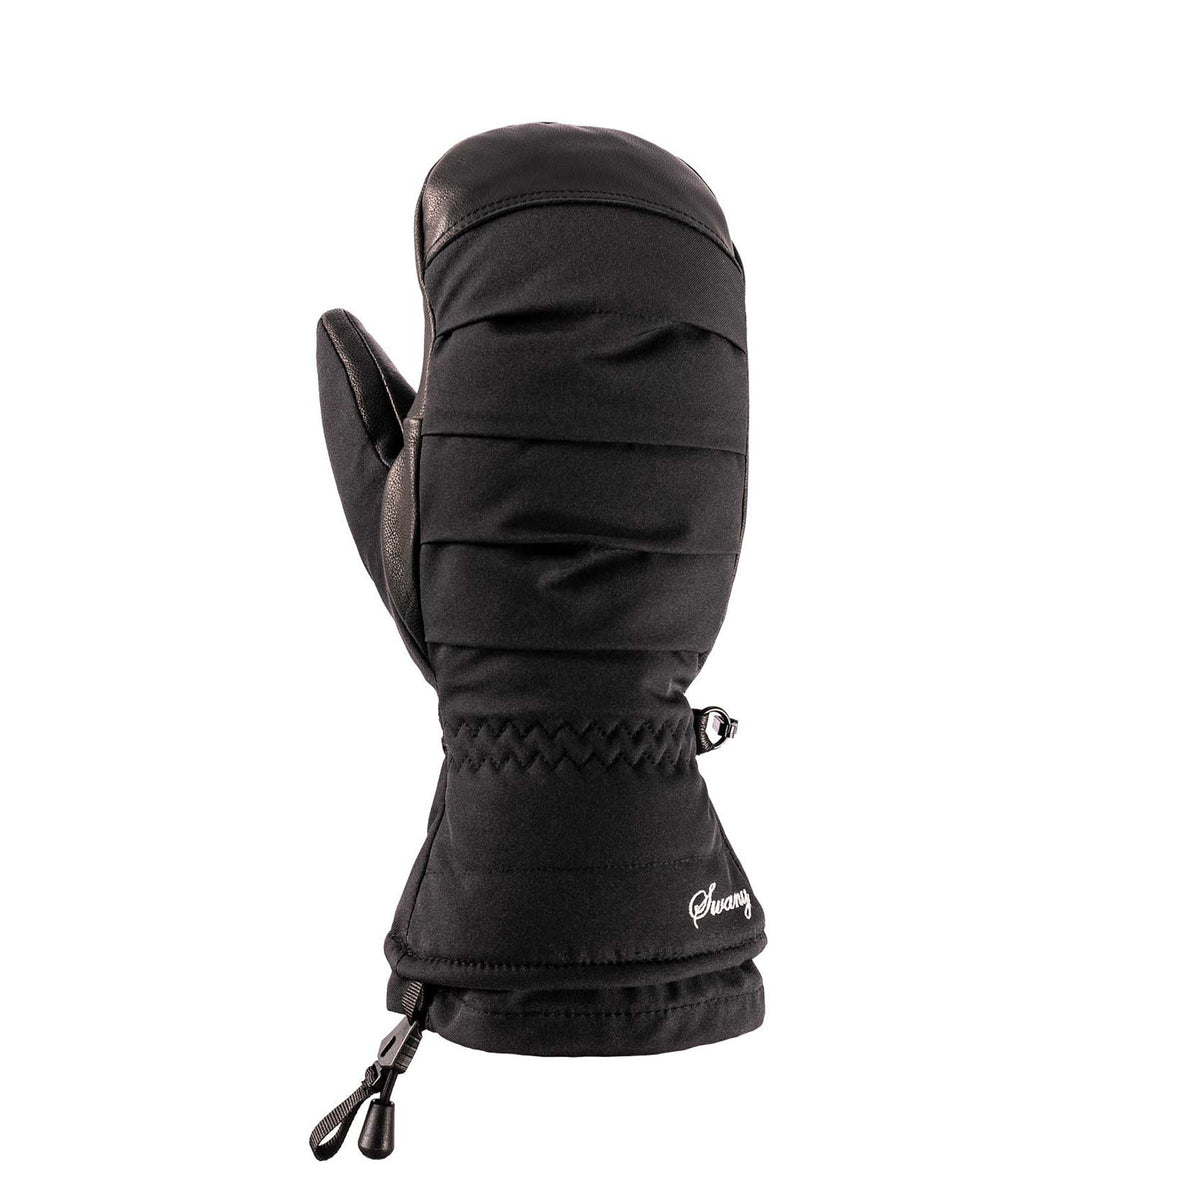 Hero image featuring the topside of the Swany Ladown ladies mitt in black.